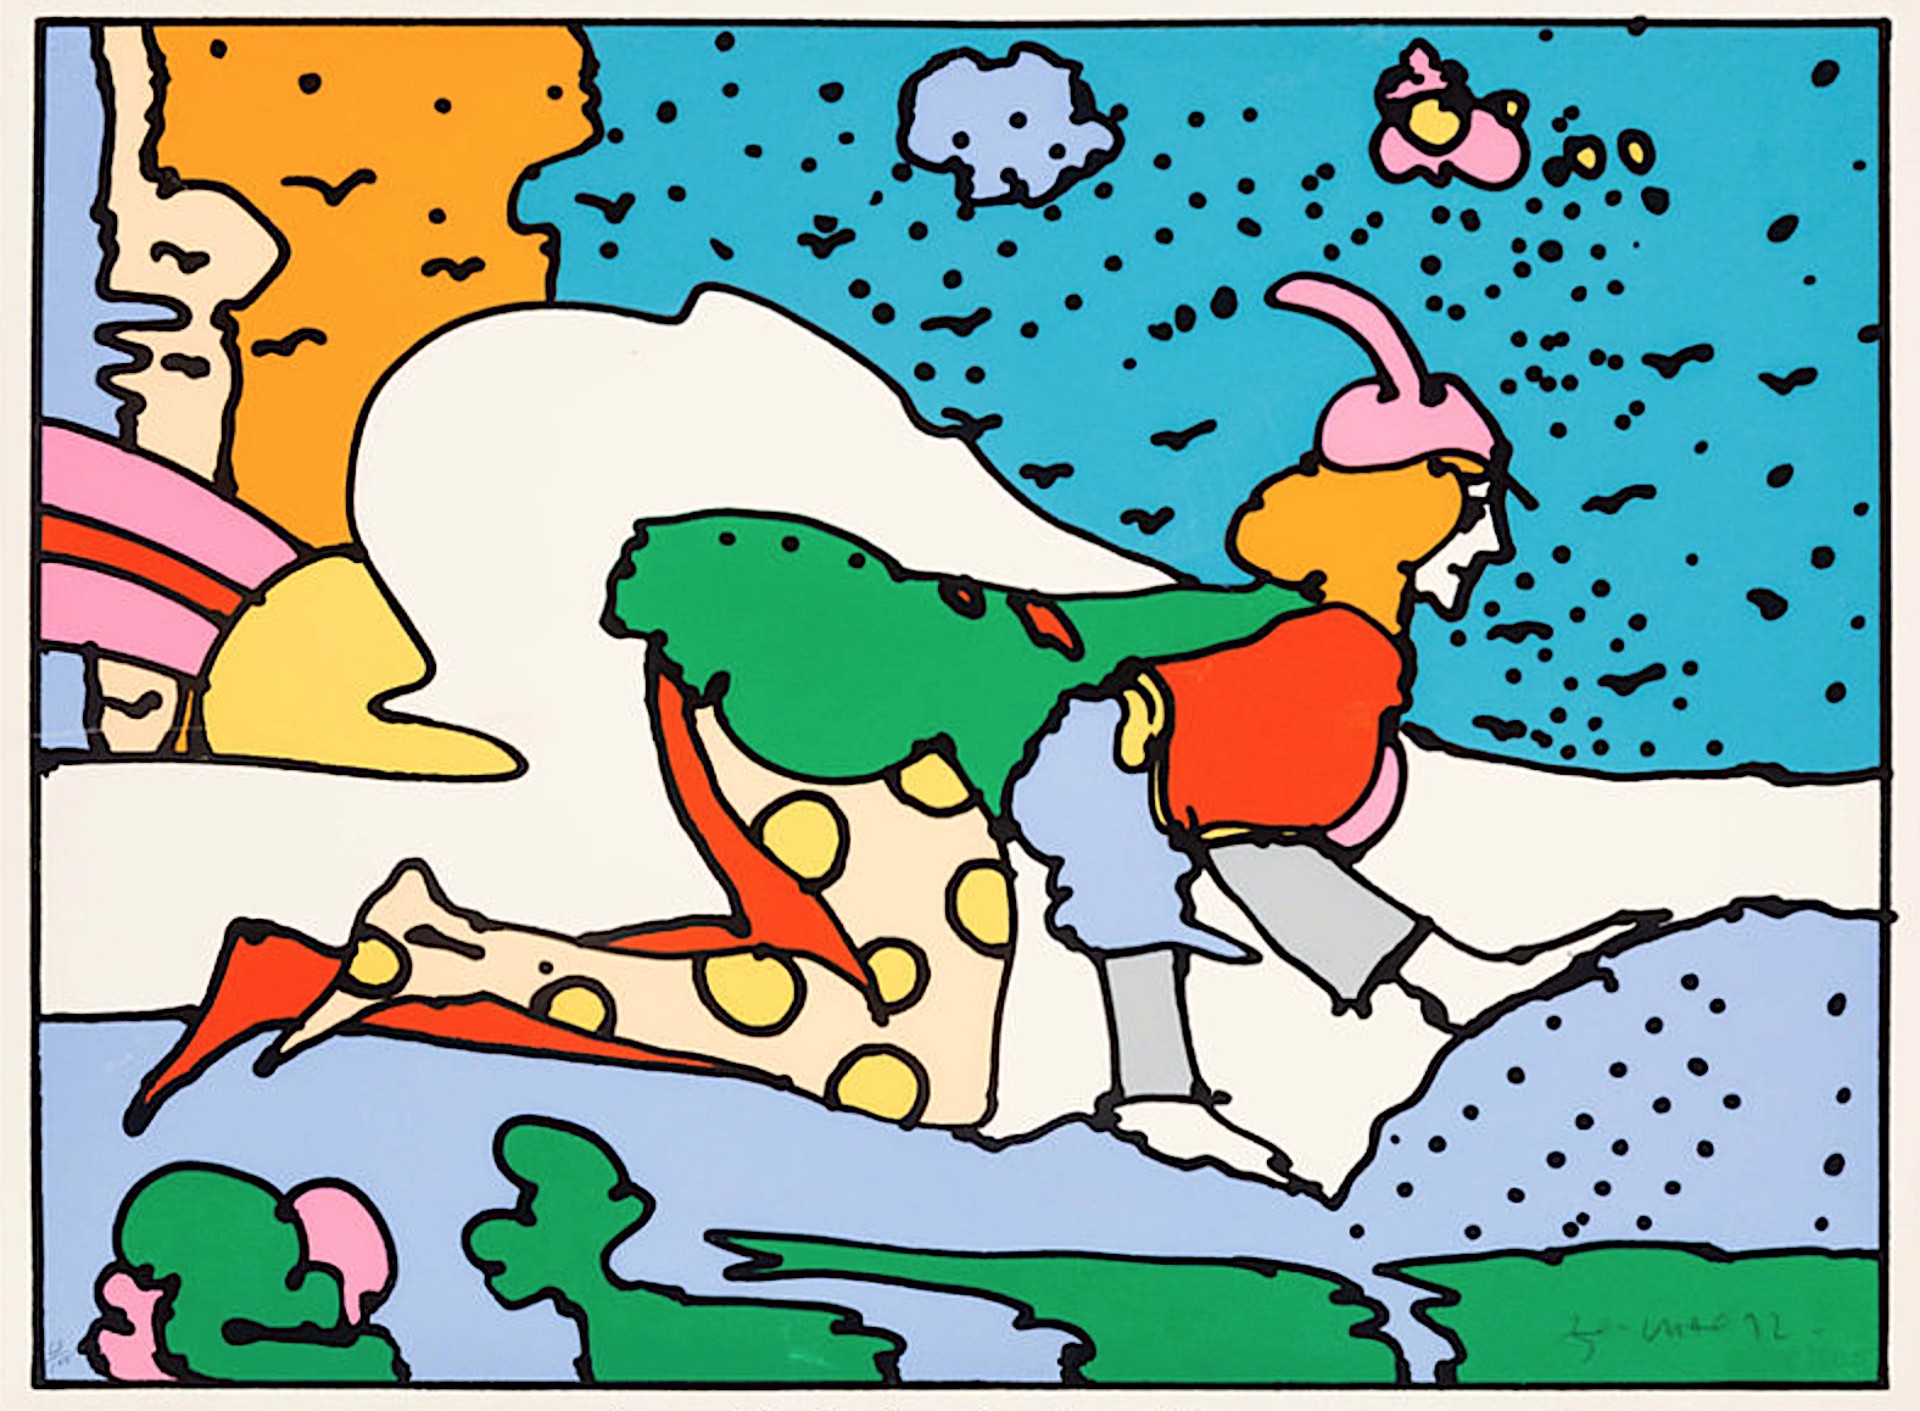 The Playful Prince by Peter Max